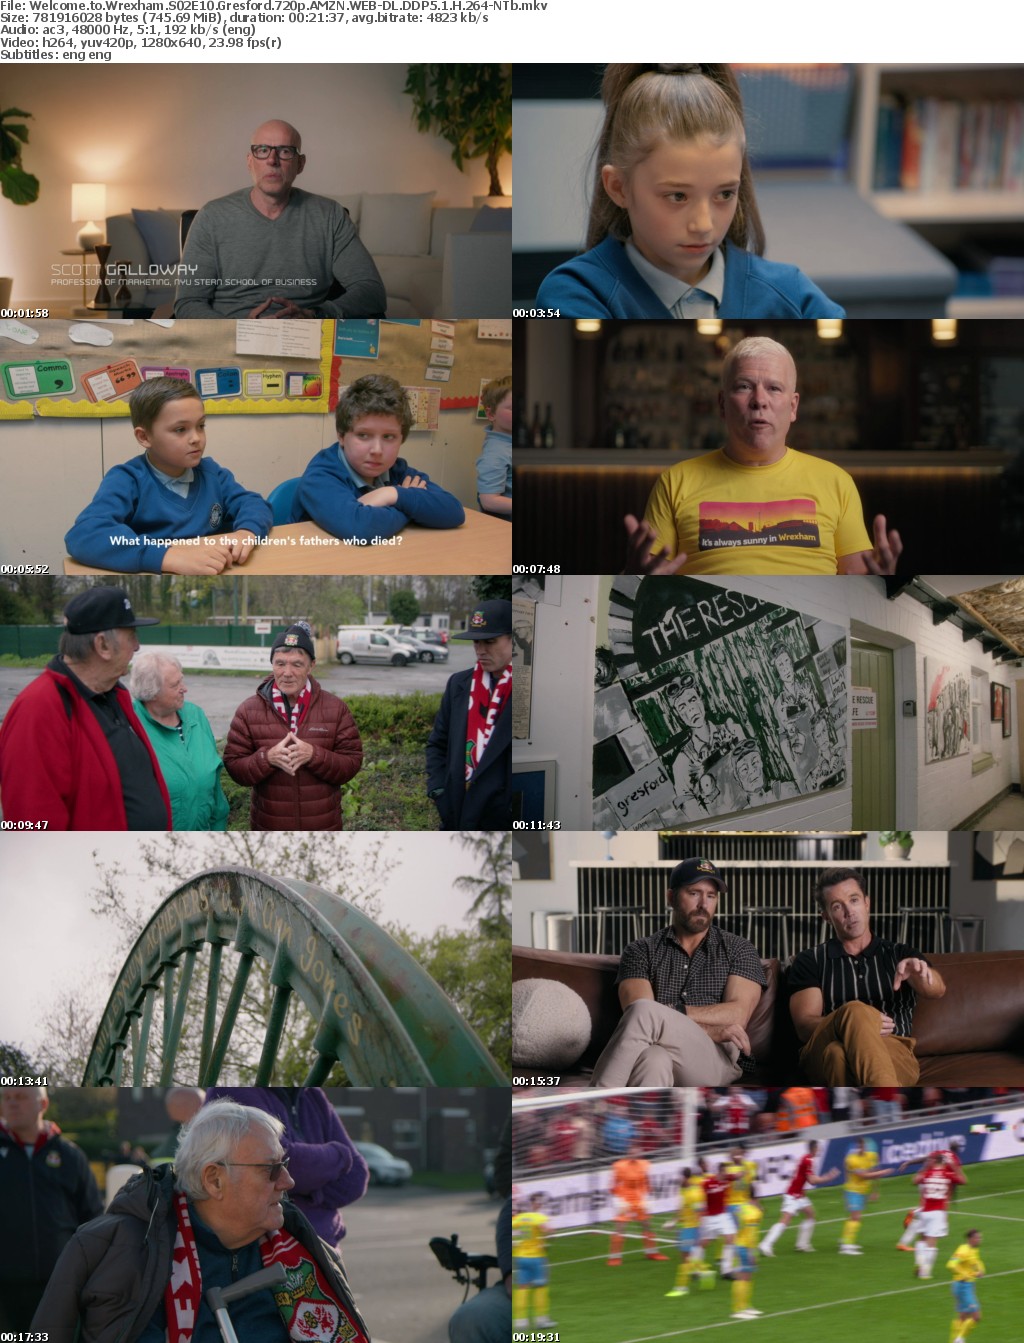 Welcome to Wrexham S02E10 Gresford 720p AMZN WEB-DL DDP5 1 H 264-NTb